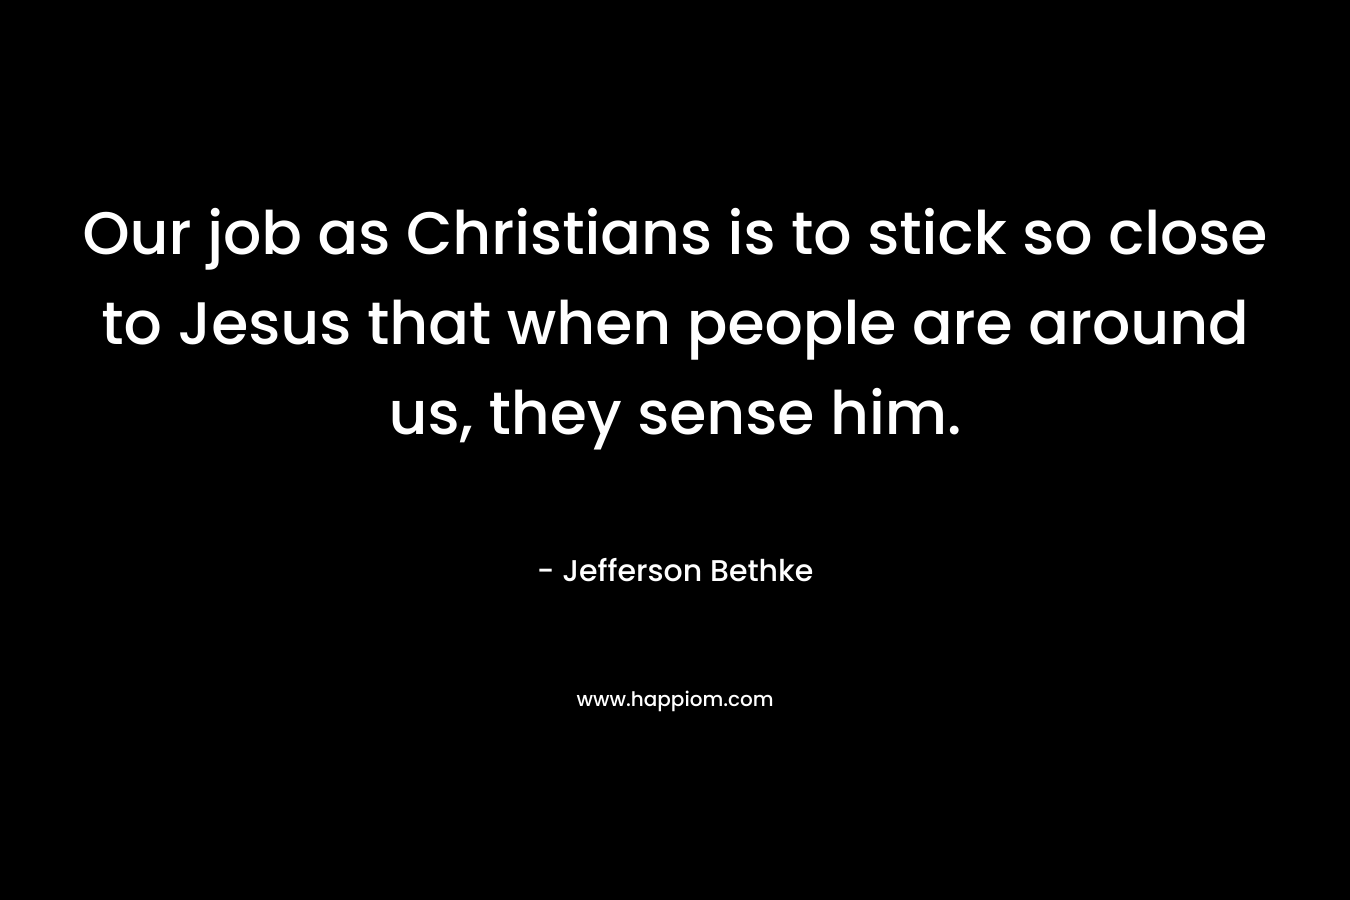 Our job as Christians is to stick so close to Jesus that when people are around us, they sense him. – Jefferson Bethke